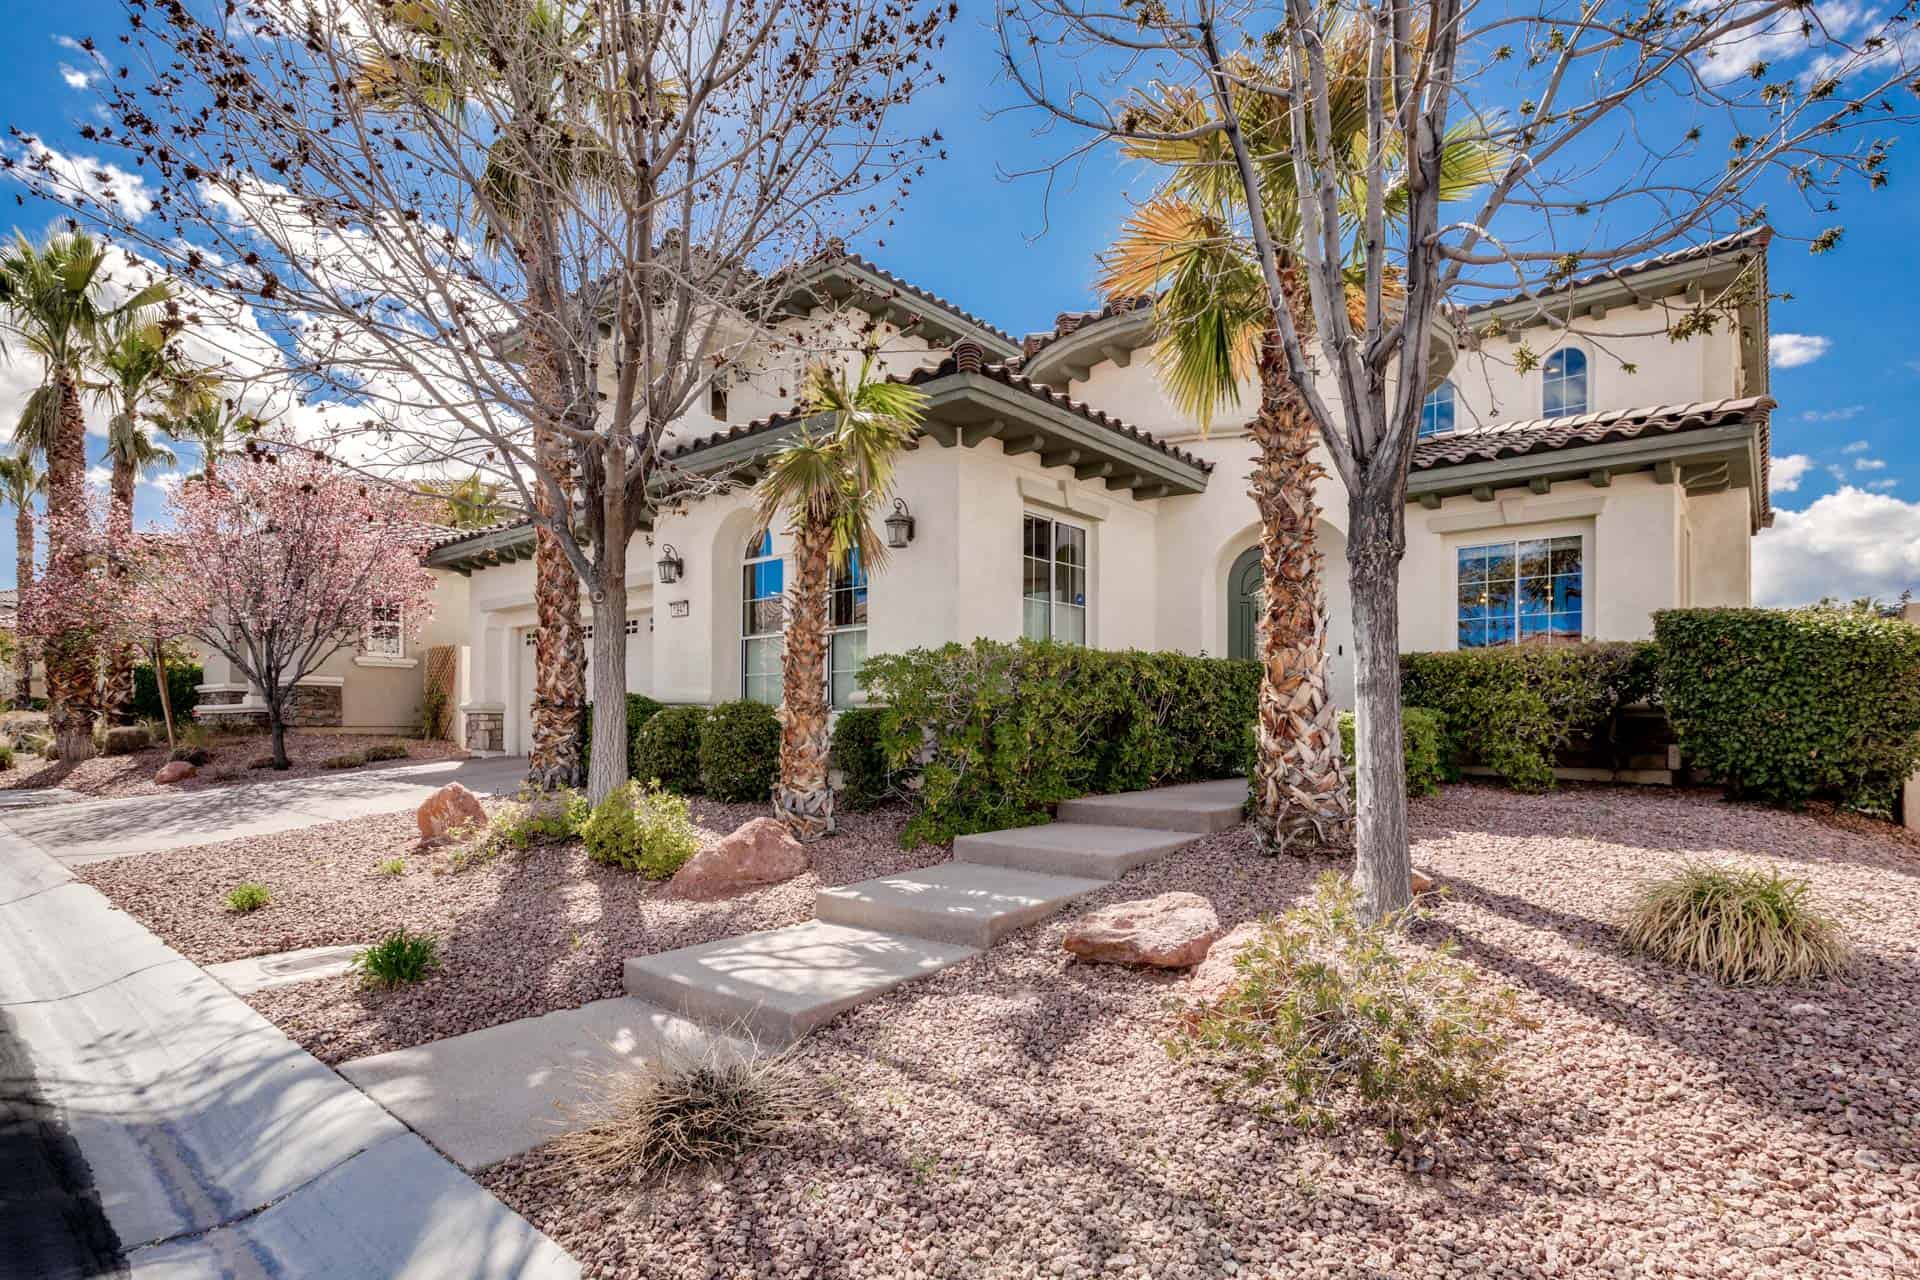 las-vegas-luxry-real-estate-realtor-rob-jensen-company-1947-orchard-mist-street-red-rock-country-club50